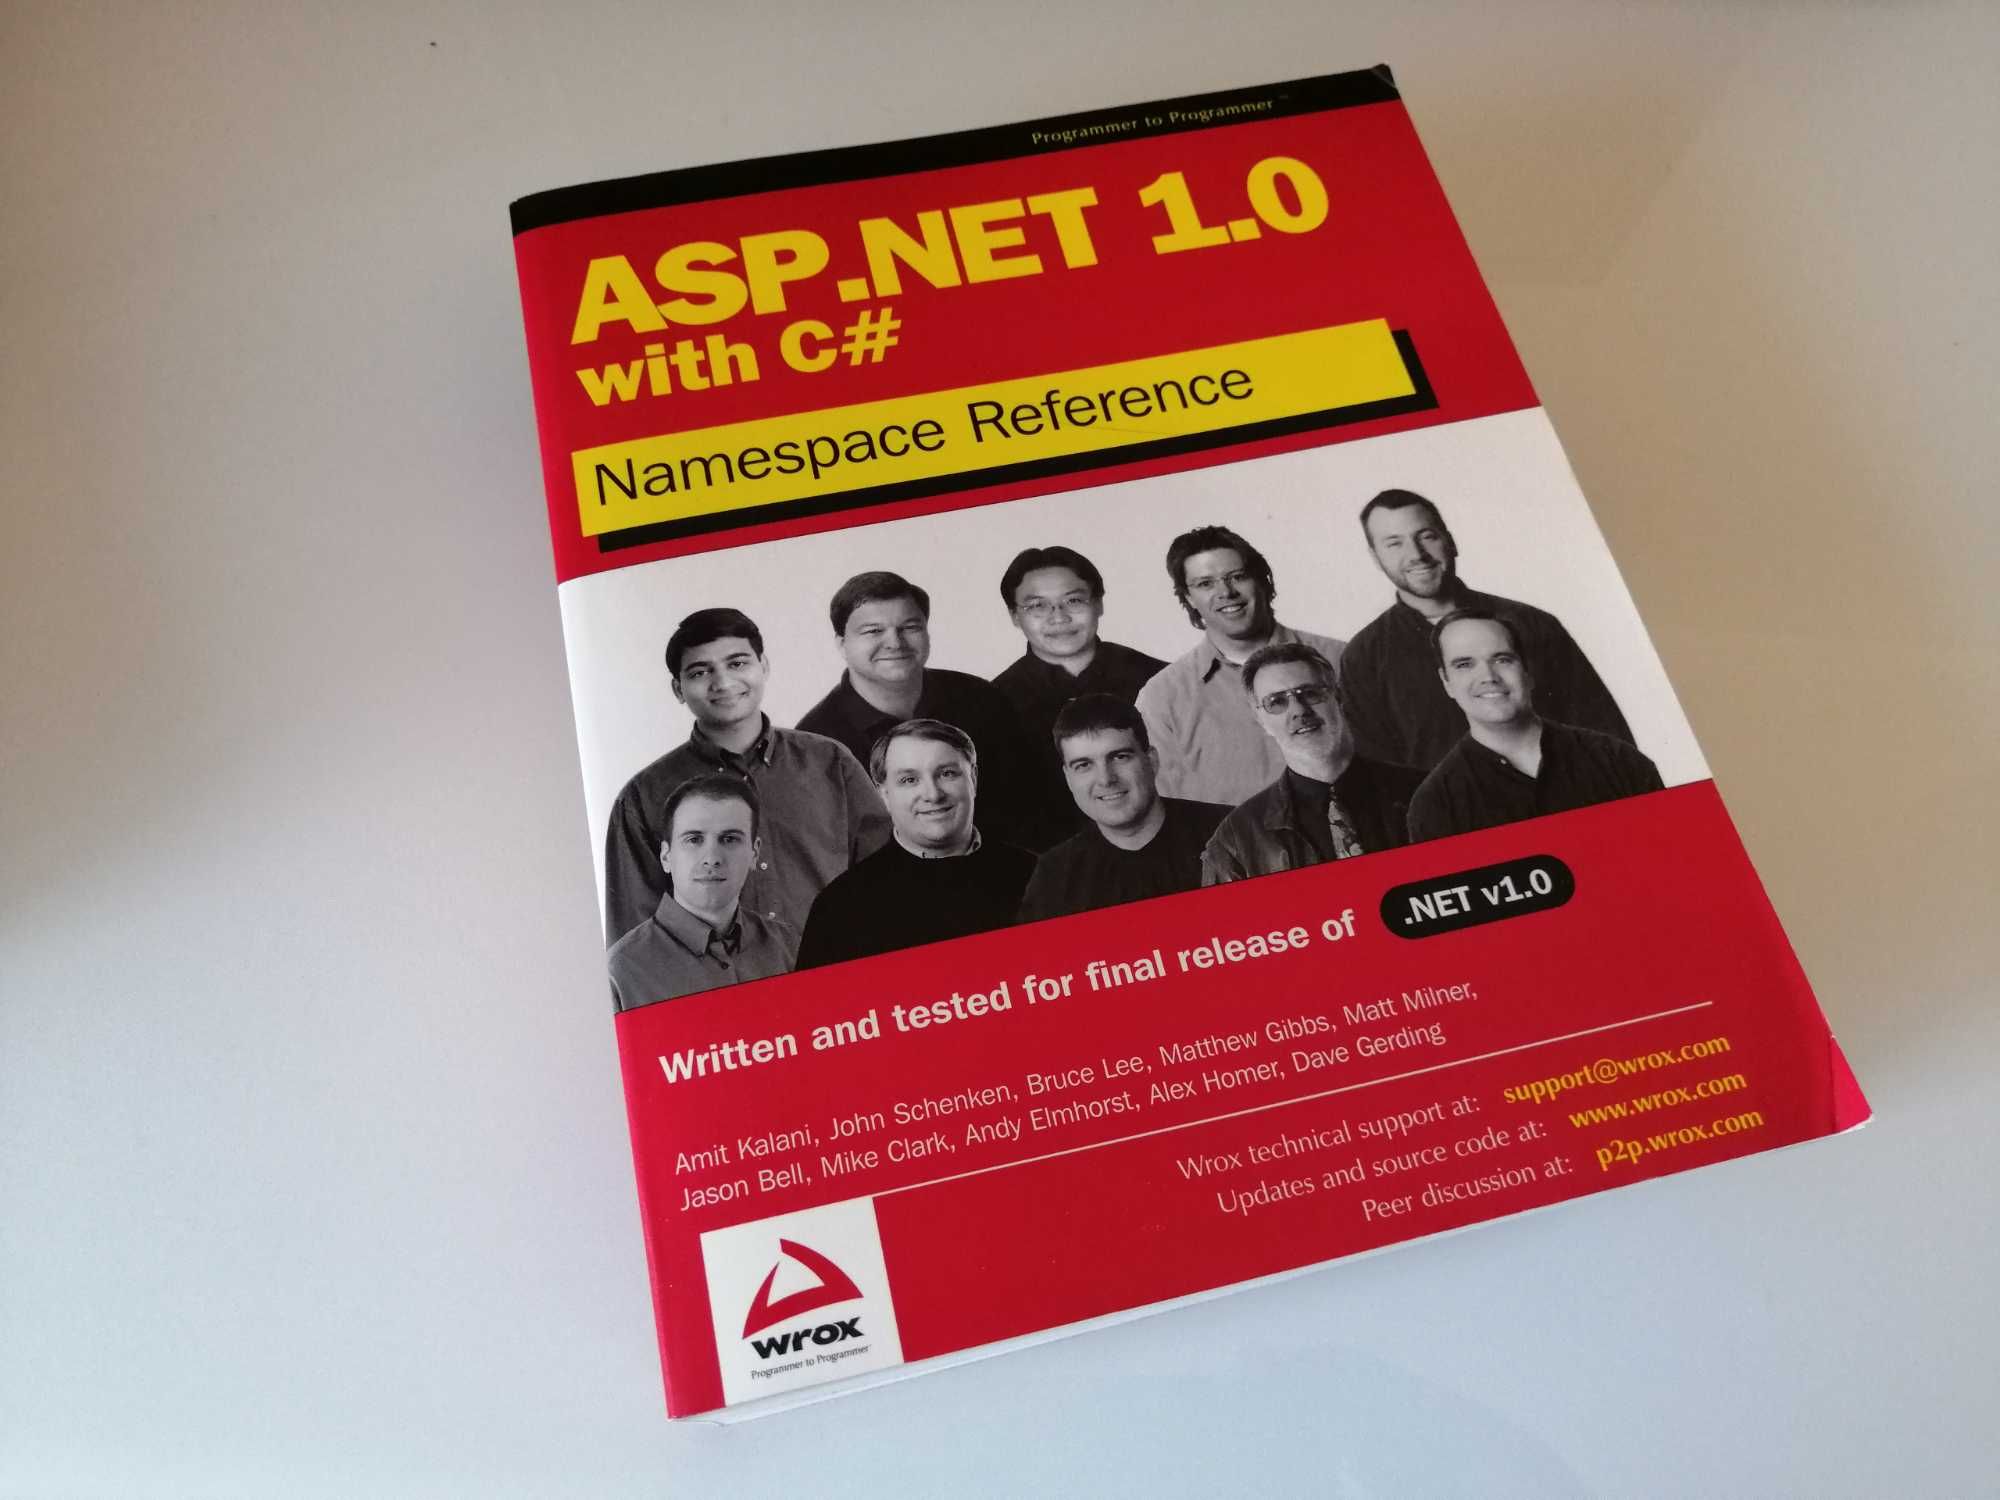 Livro ASP.Net 1.0 with c# Namespace Reference